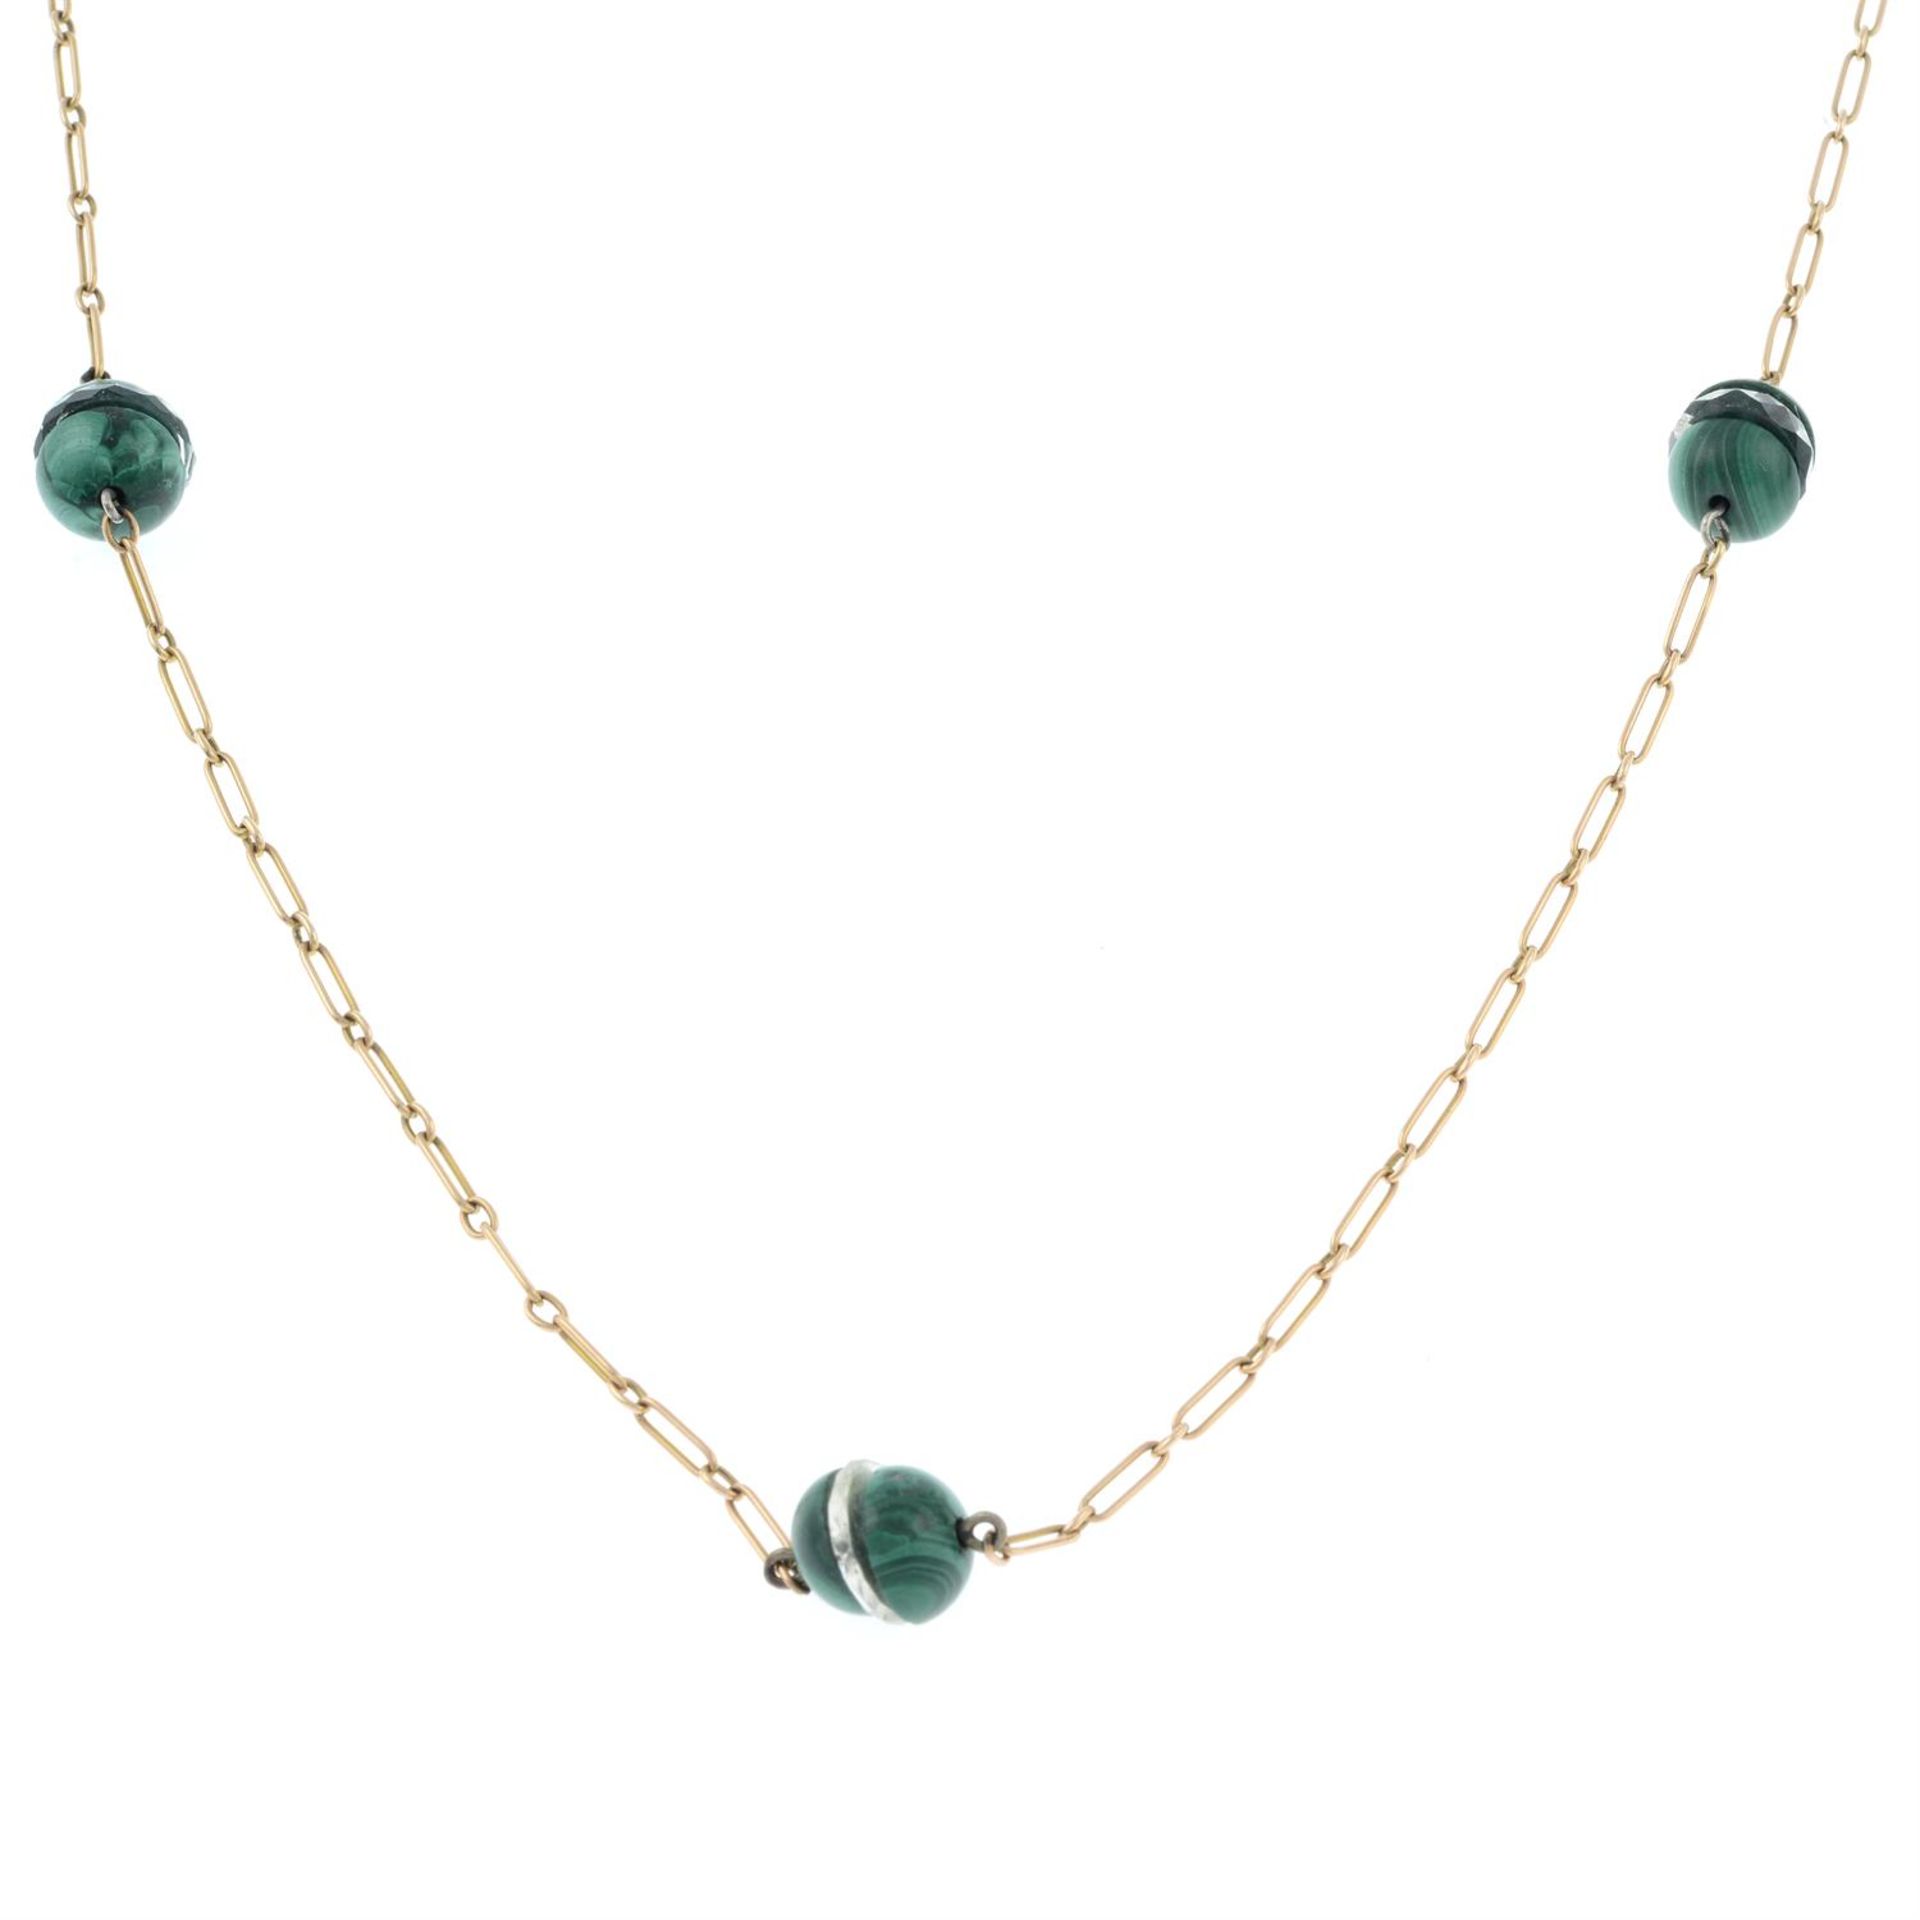 An early 20th century gold malachite and rock quartz necklace.